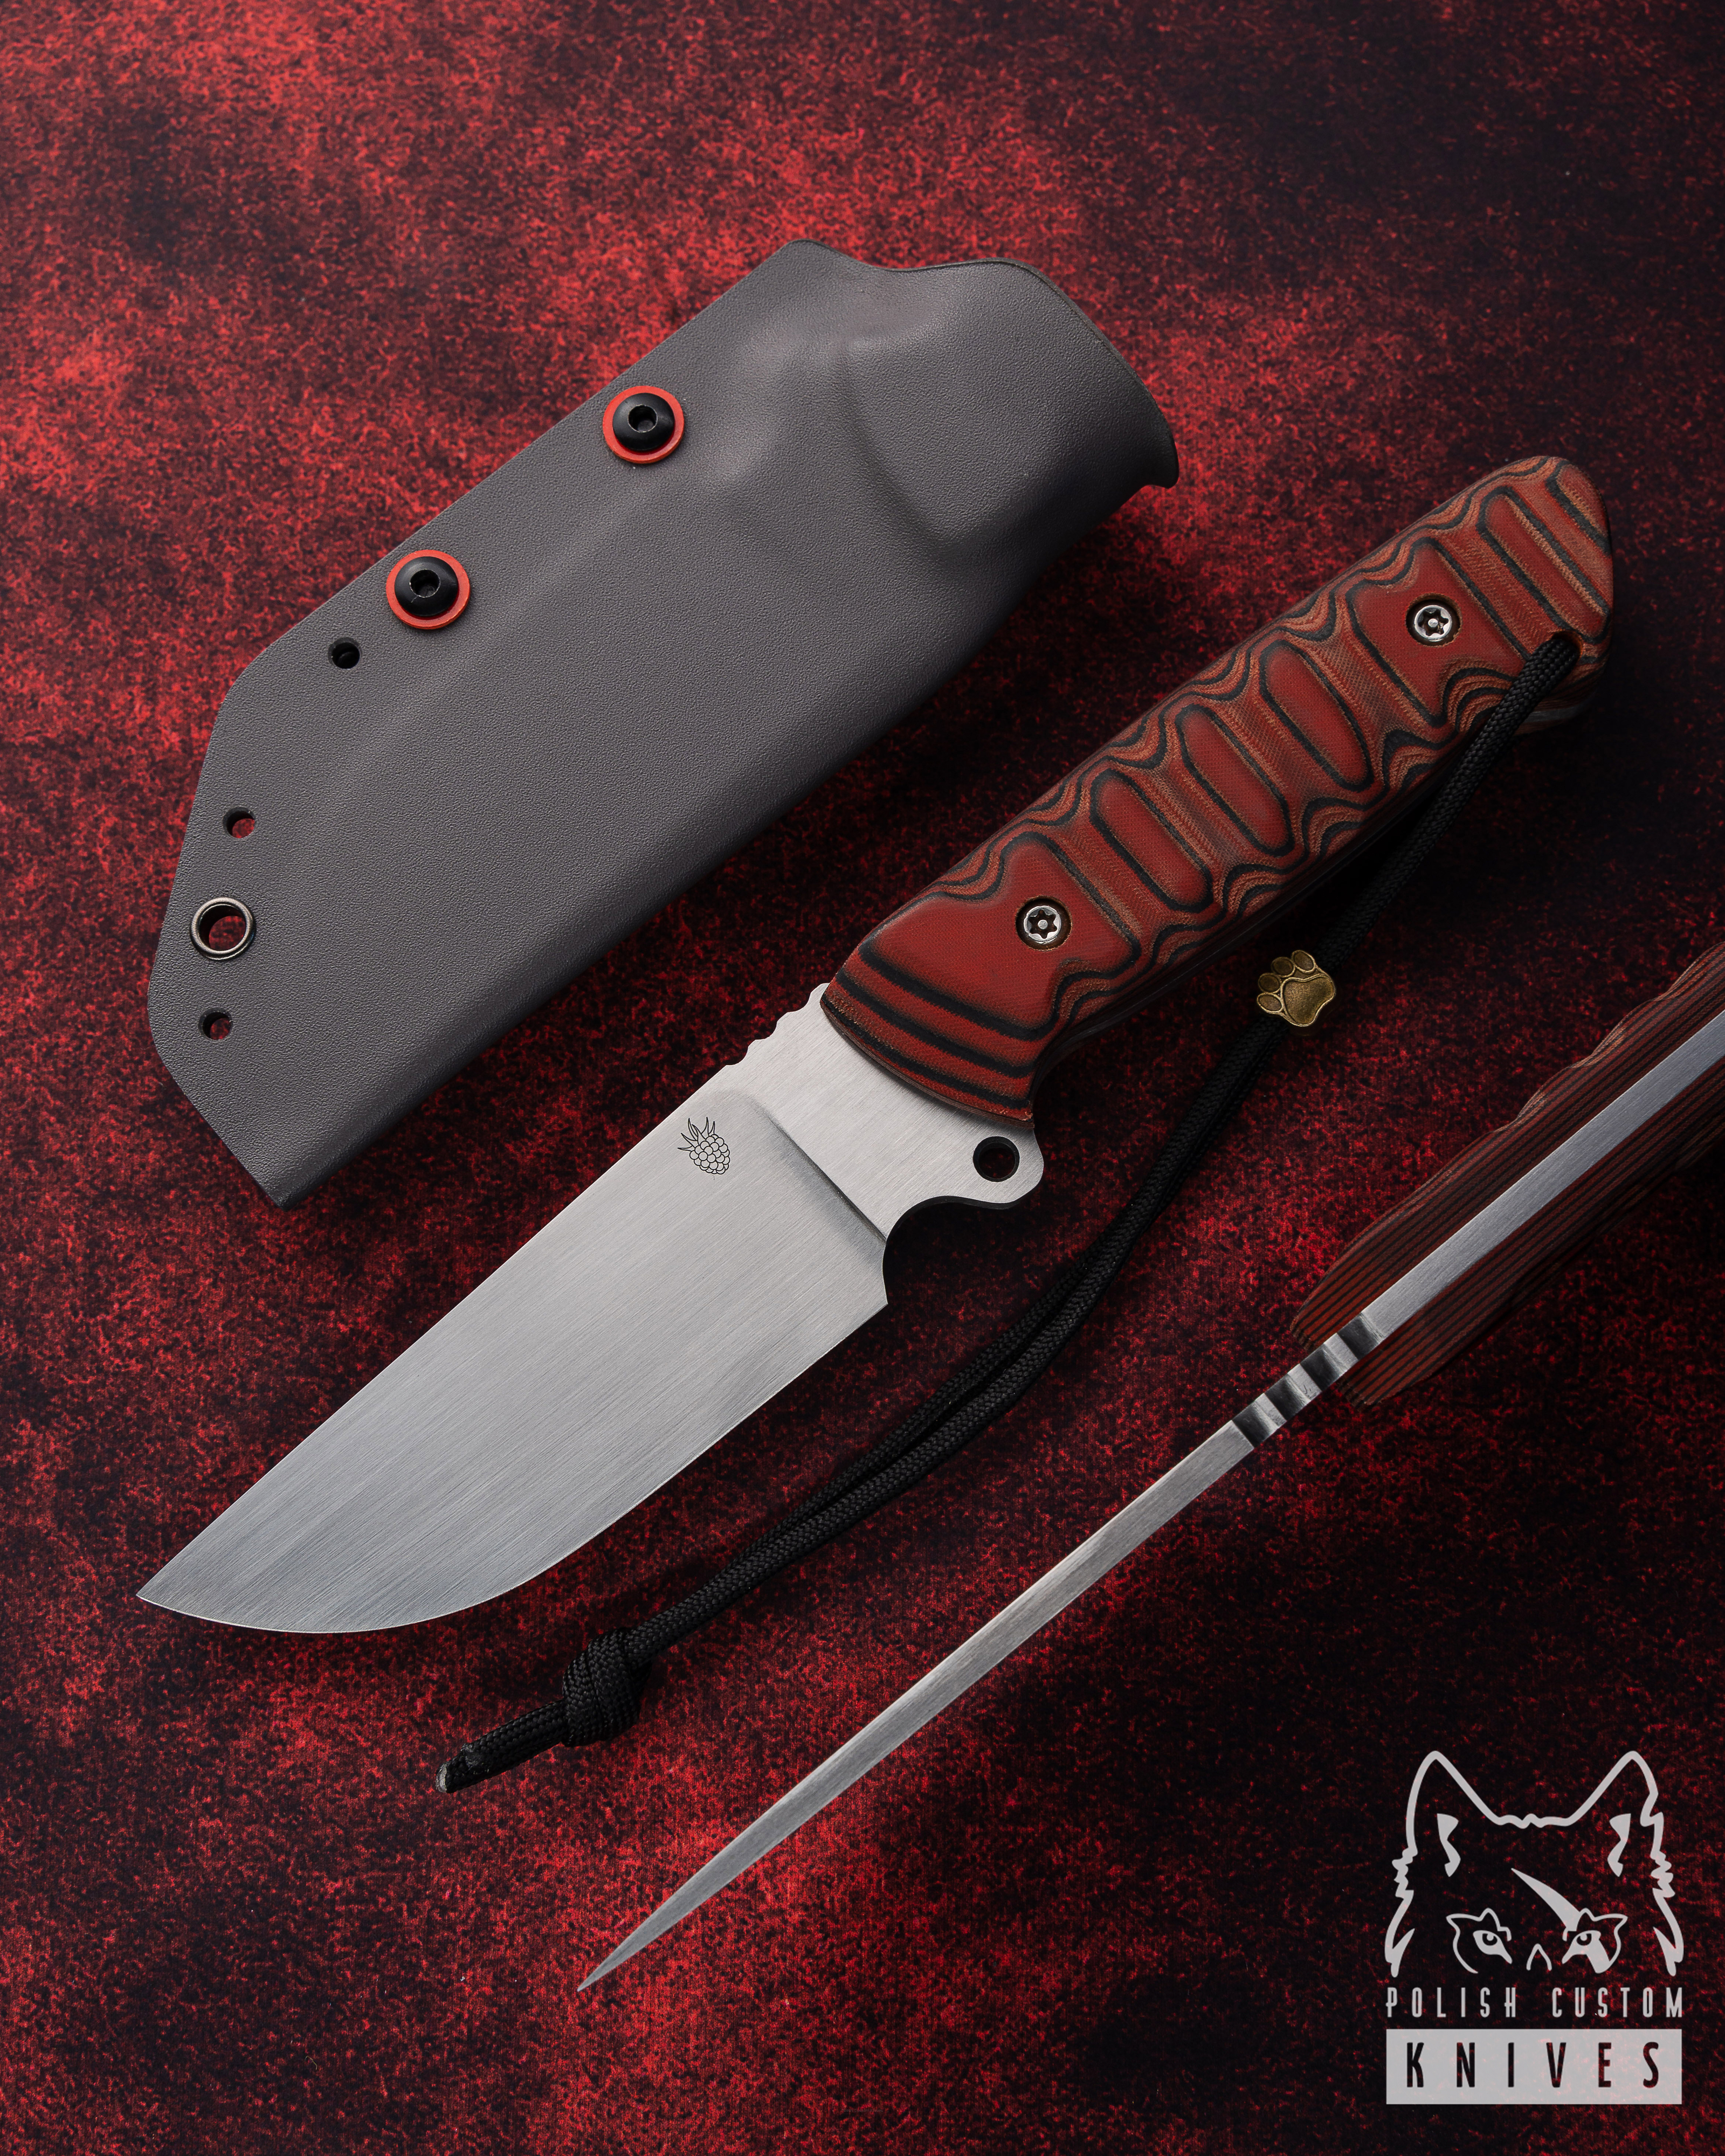 Coltelleria Collini - Big Brother Survival knife 😎 Follow us  👉@coltelleriacollini👈 Order: knives.it -------------------------------  #hunting #hunter #knivesdaily #blades #kabar #intothewild #intothewoods  #hunting #hunt #bushcrafting #knifelife